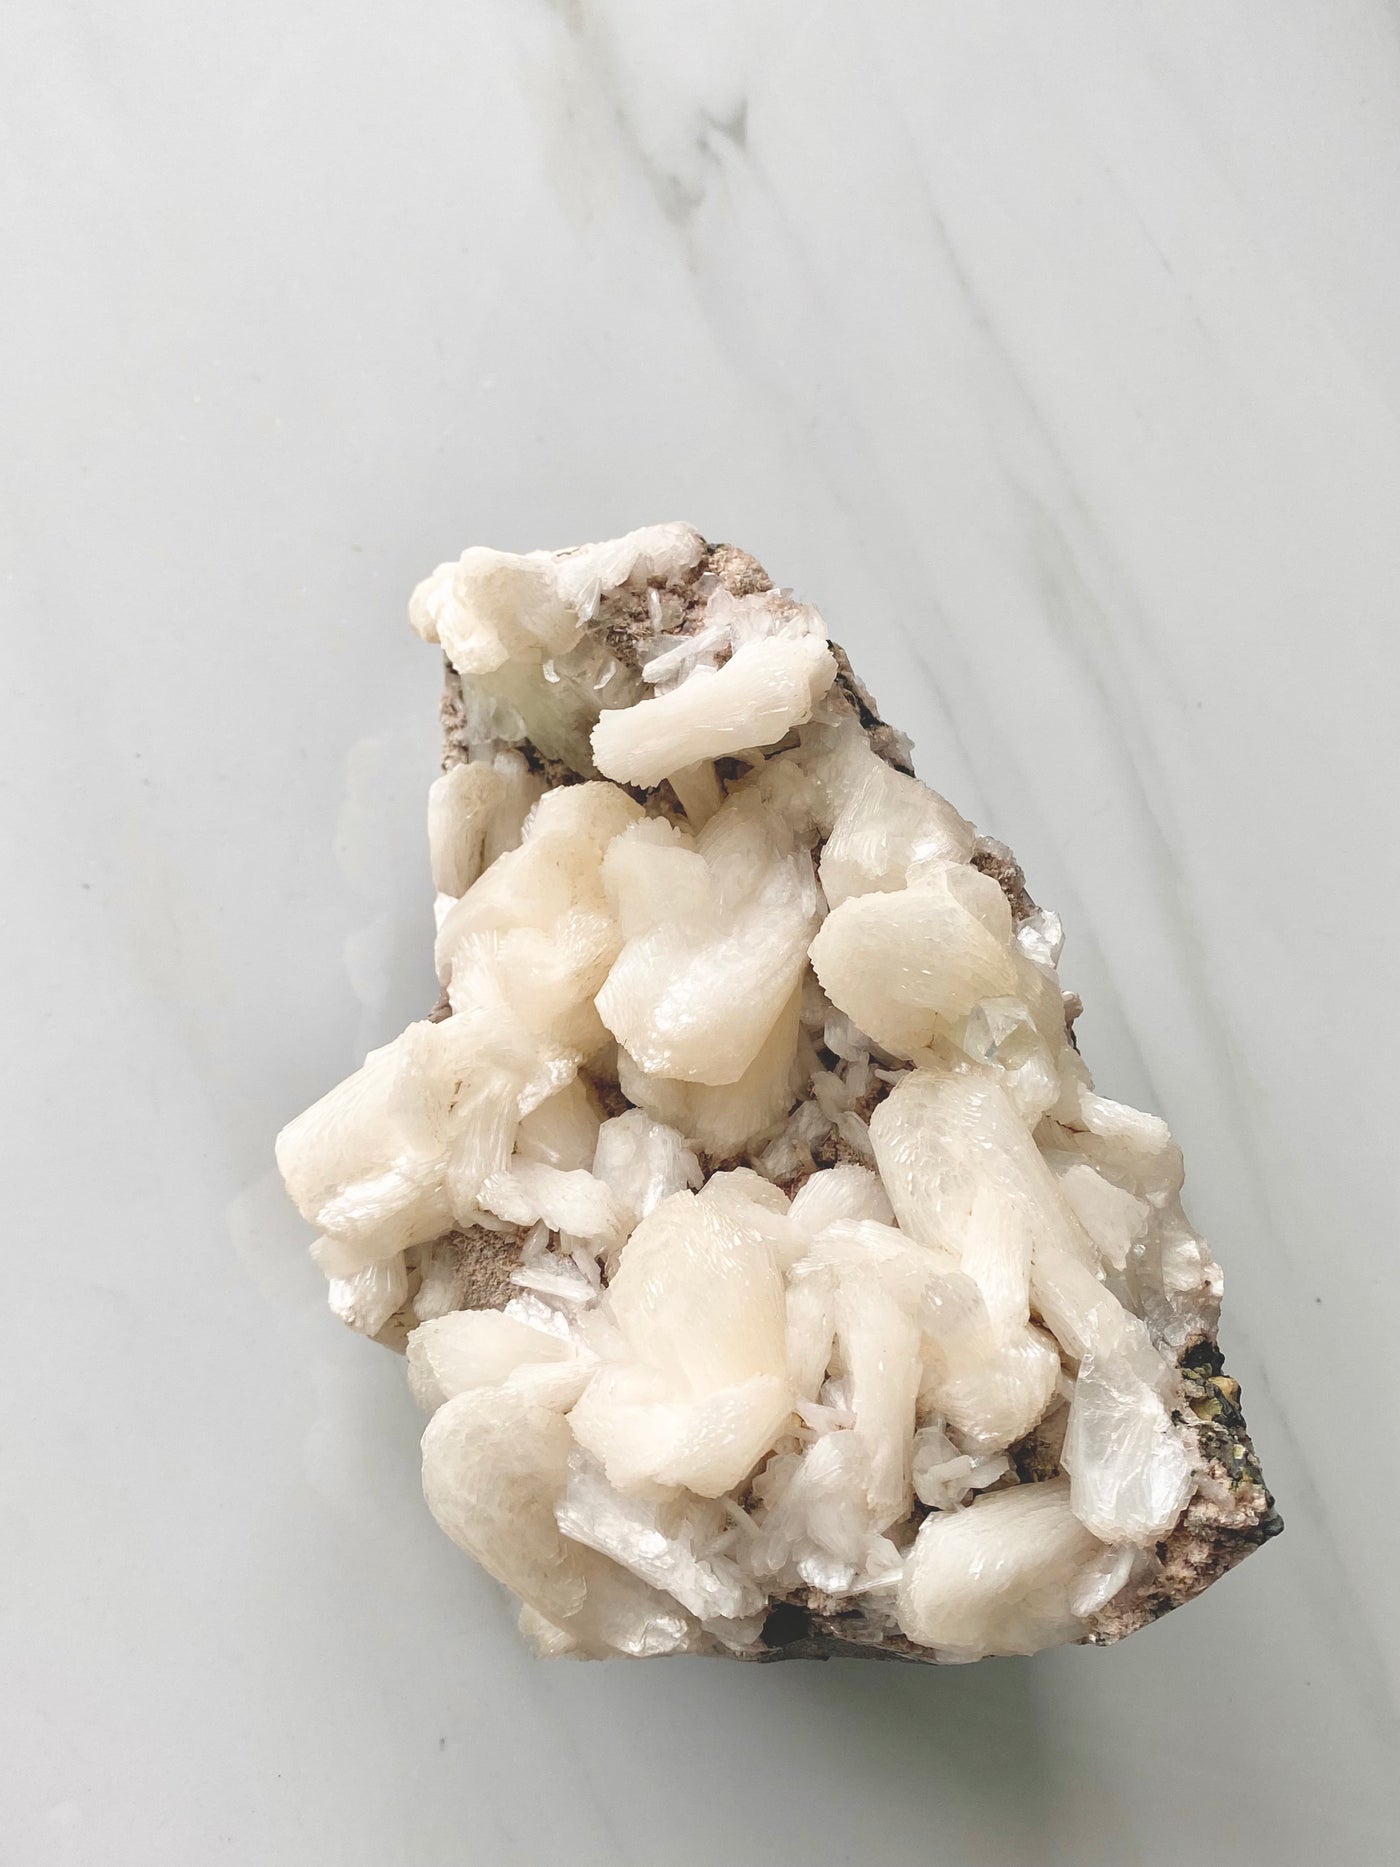 Embrace Serenity and Spiritual Connection with Apophyllite & Scolecite Cluster: A Harmonious Crystal Fusion